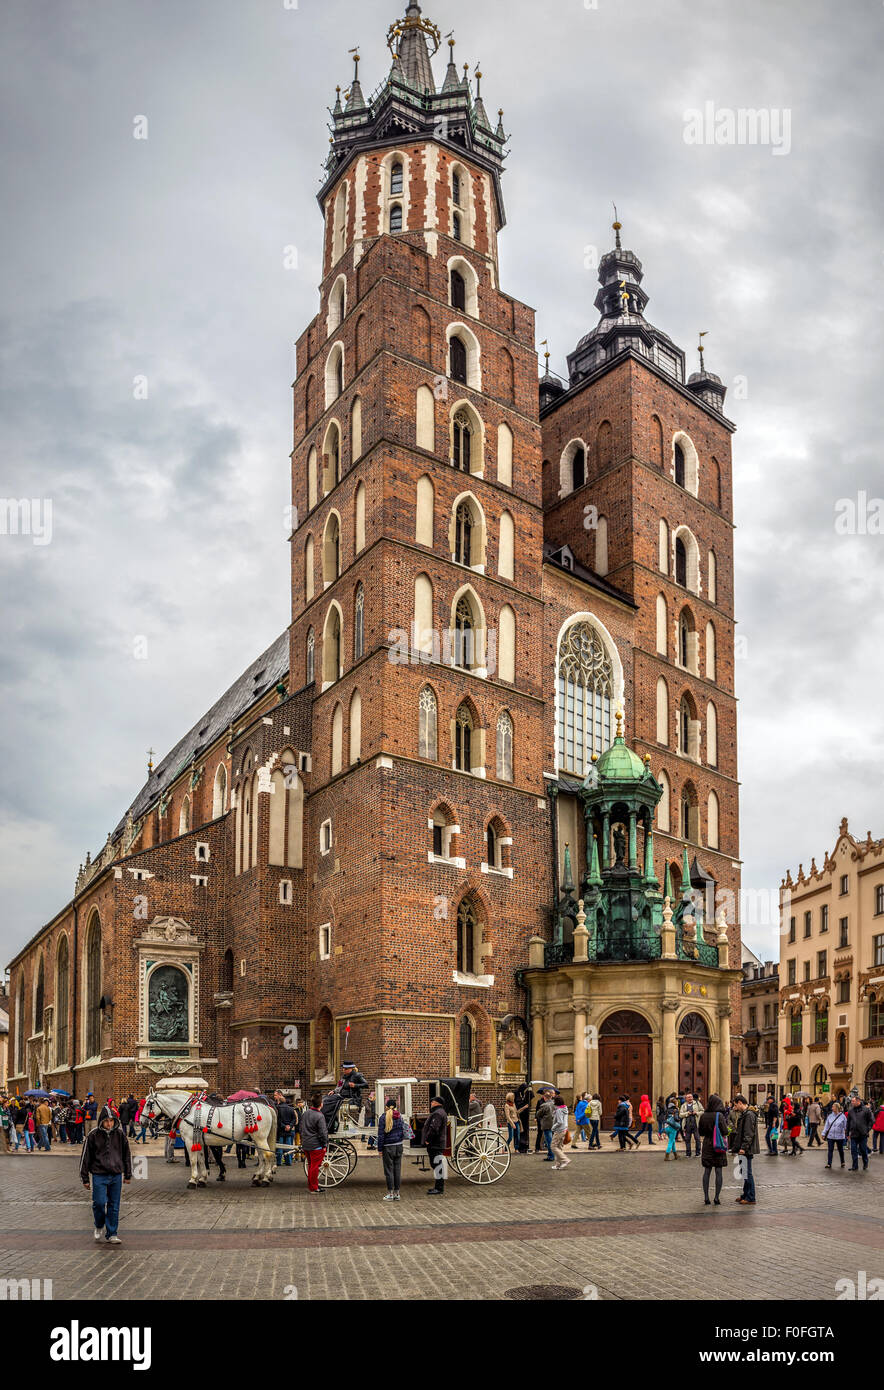 CRACOW, POLAND - MAY 01, 2015: anonymous tourists visiting Mariacki church at the Main Square in Cracow ( Krakow ), Poland Stock Photo